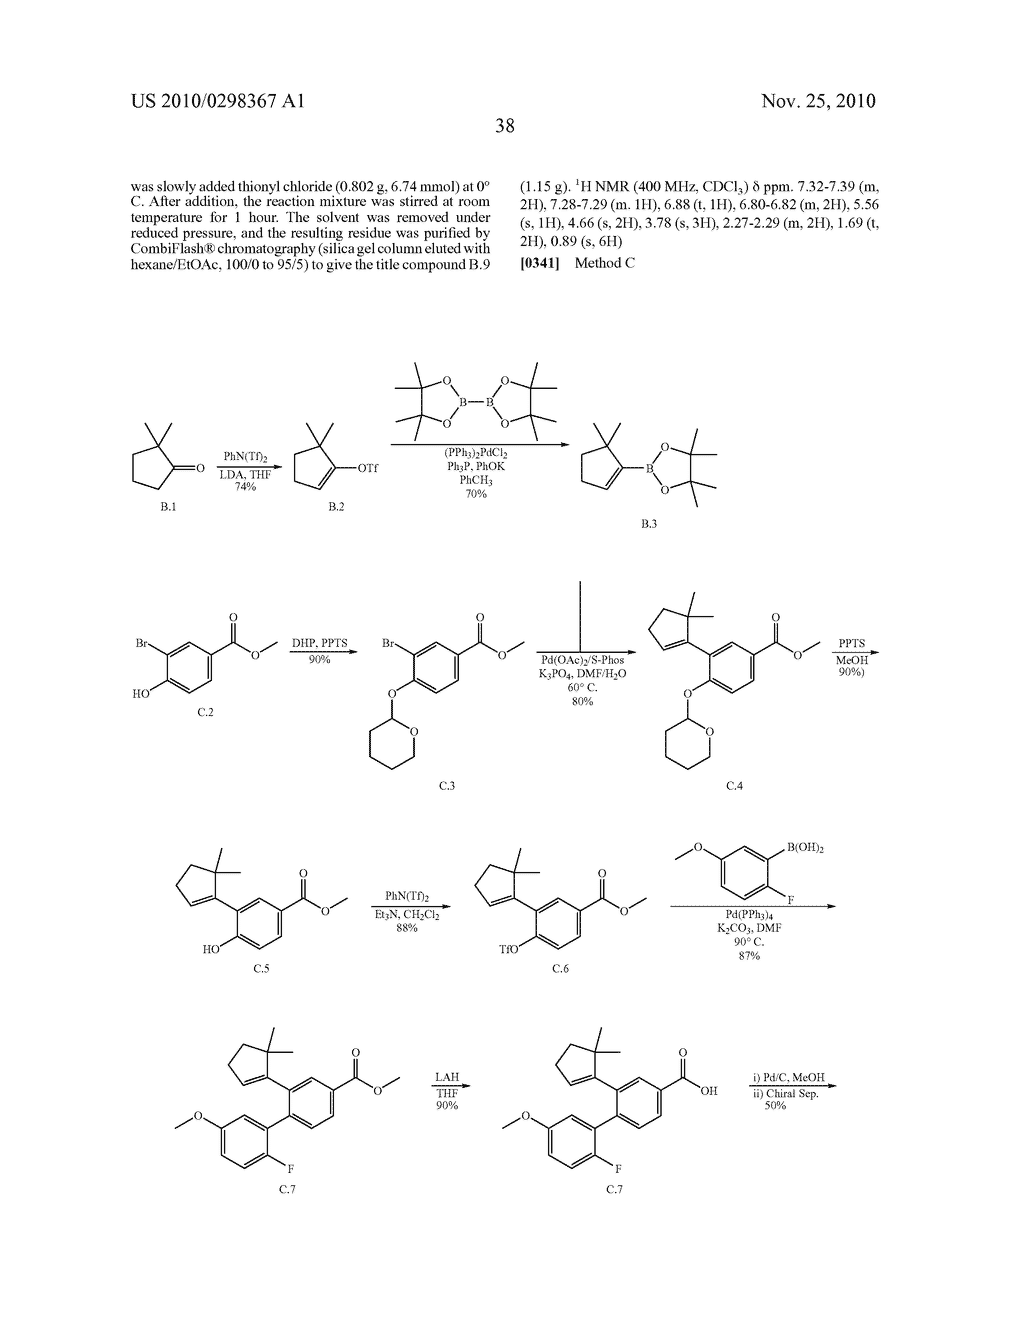 Conformationally Constrained Carboxylic Acid Derivatives Useful for Treating Metabolic Disorders - diagram, schematic, and image 40